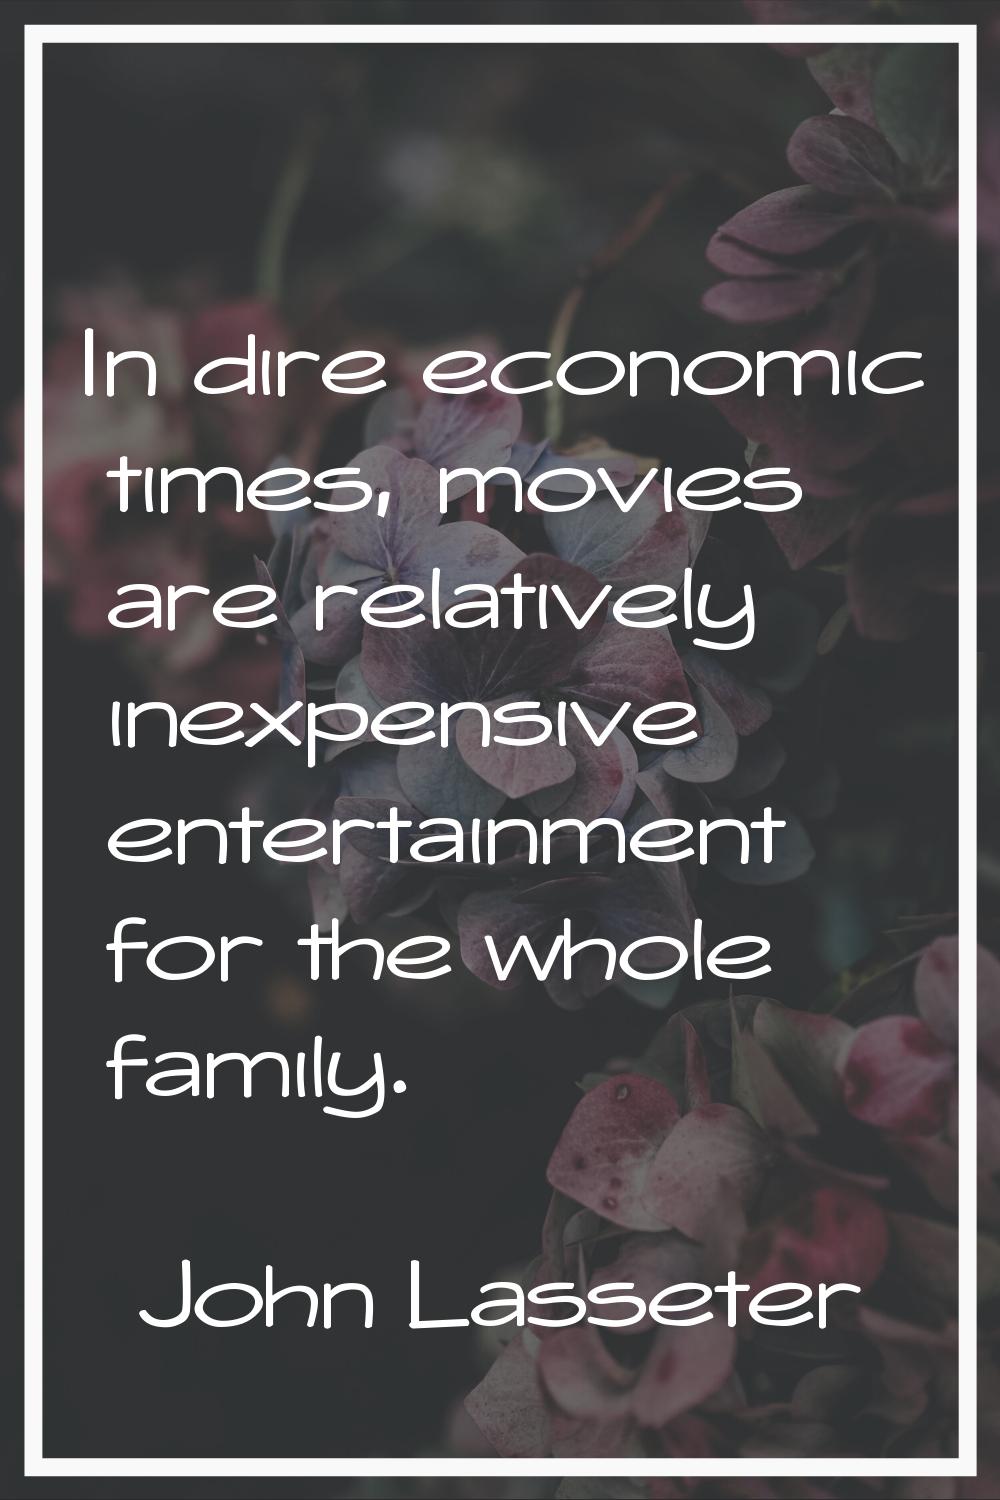 In dire economic times, movies are relatively inexpensive entertainment for the whole family.